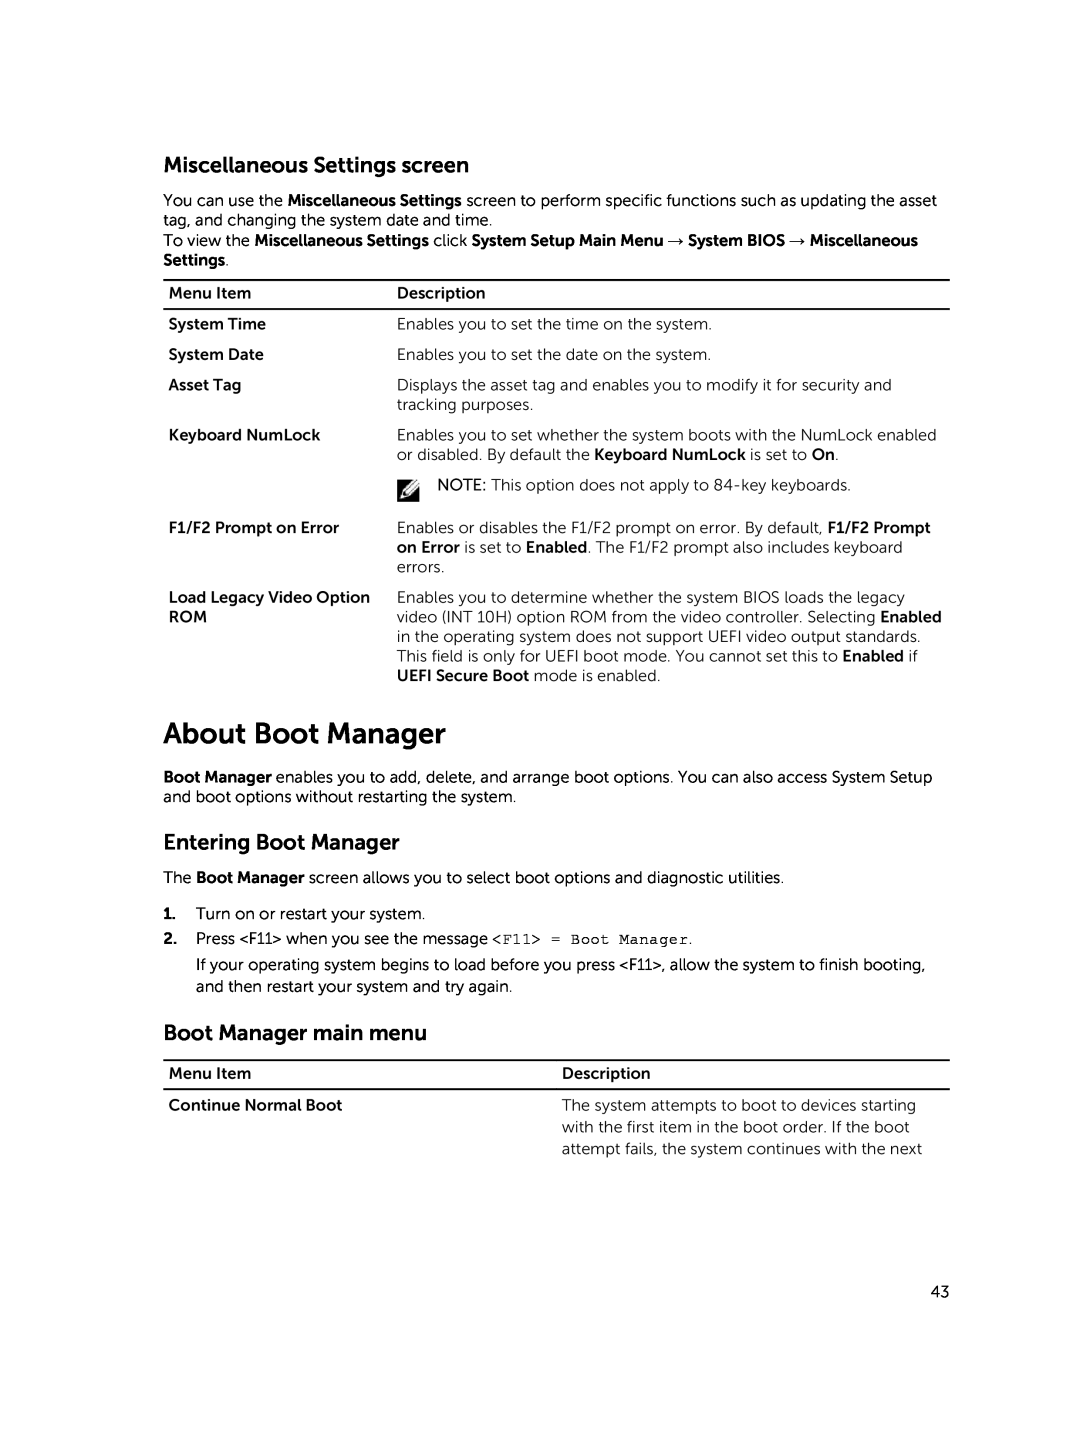 Dell E30S owner manual About Boot Manager, Miscellaneous Settings screen, Entering Boot Manager, Boot Manager main menu 